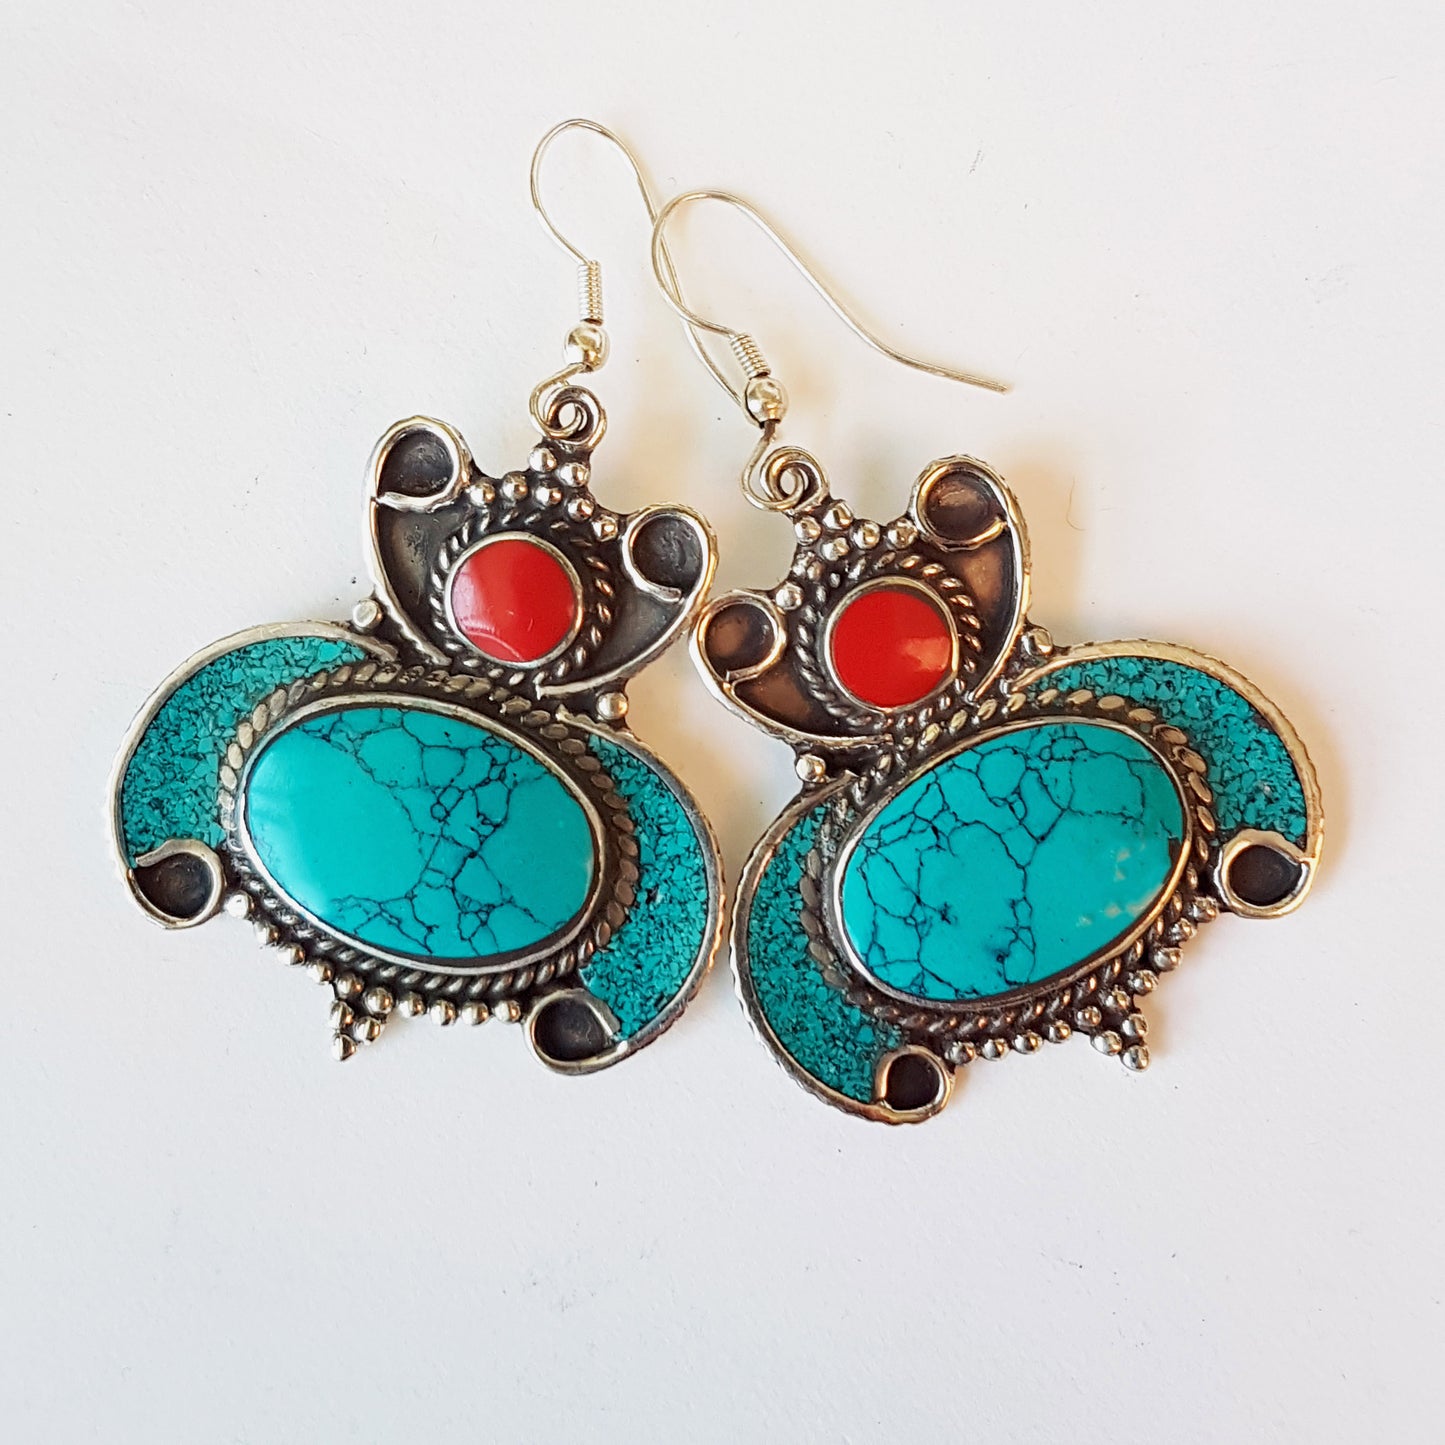 Turquoise & silver tone Boho gypsy tribal earrings. Ethnic statement drop design with coral accents. Tibetan style 2 inch hang by 1.5  inch.